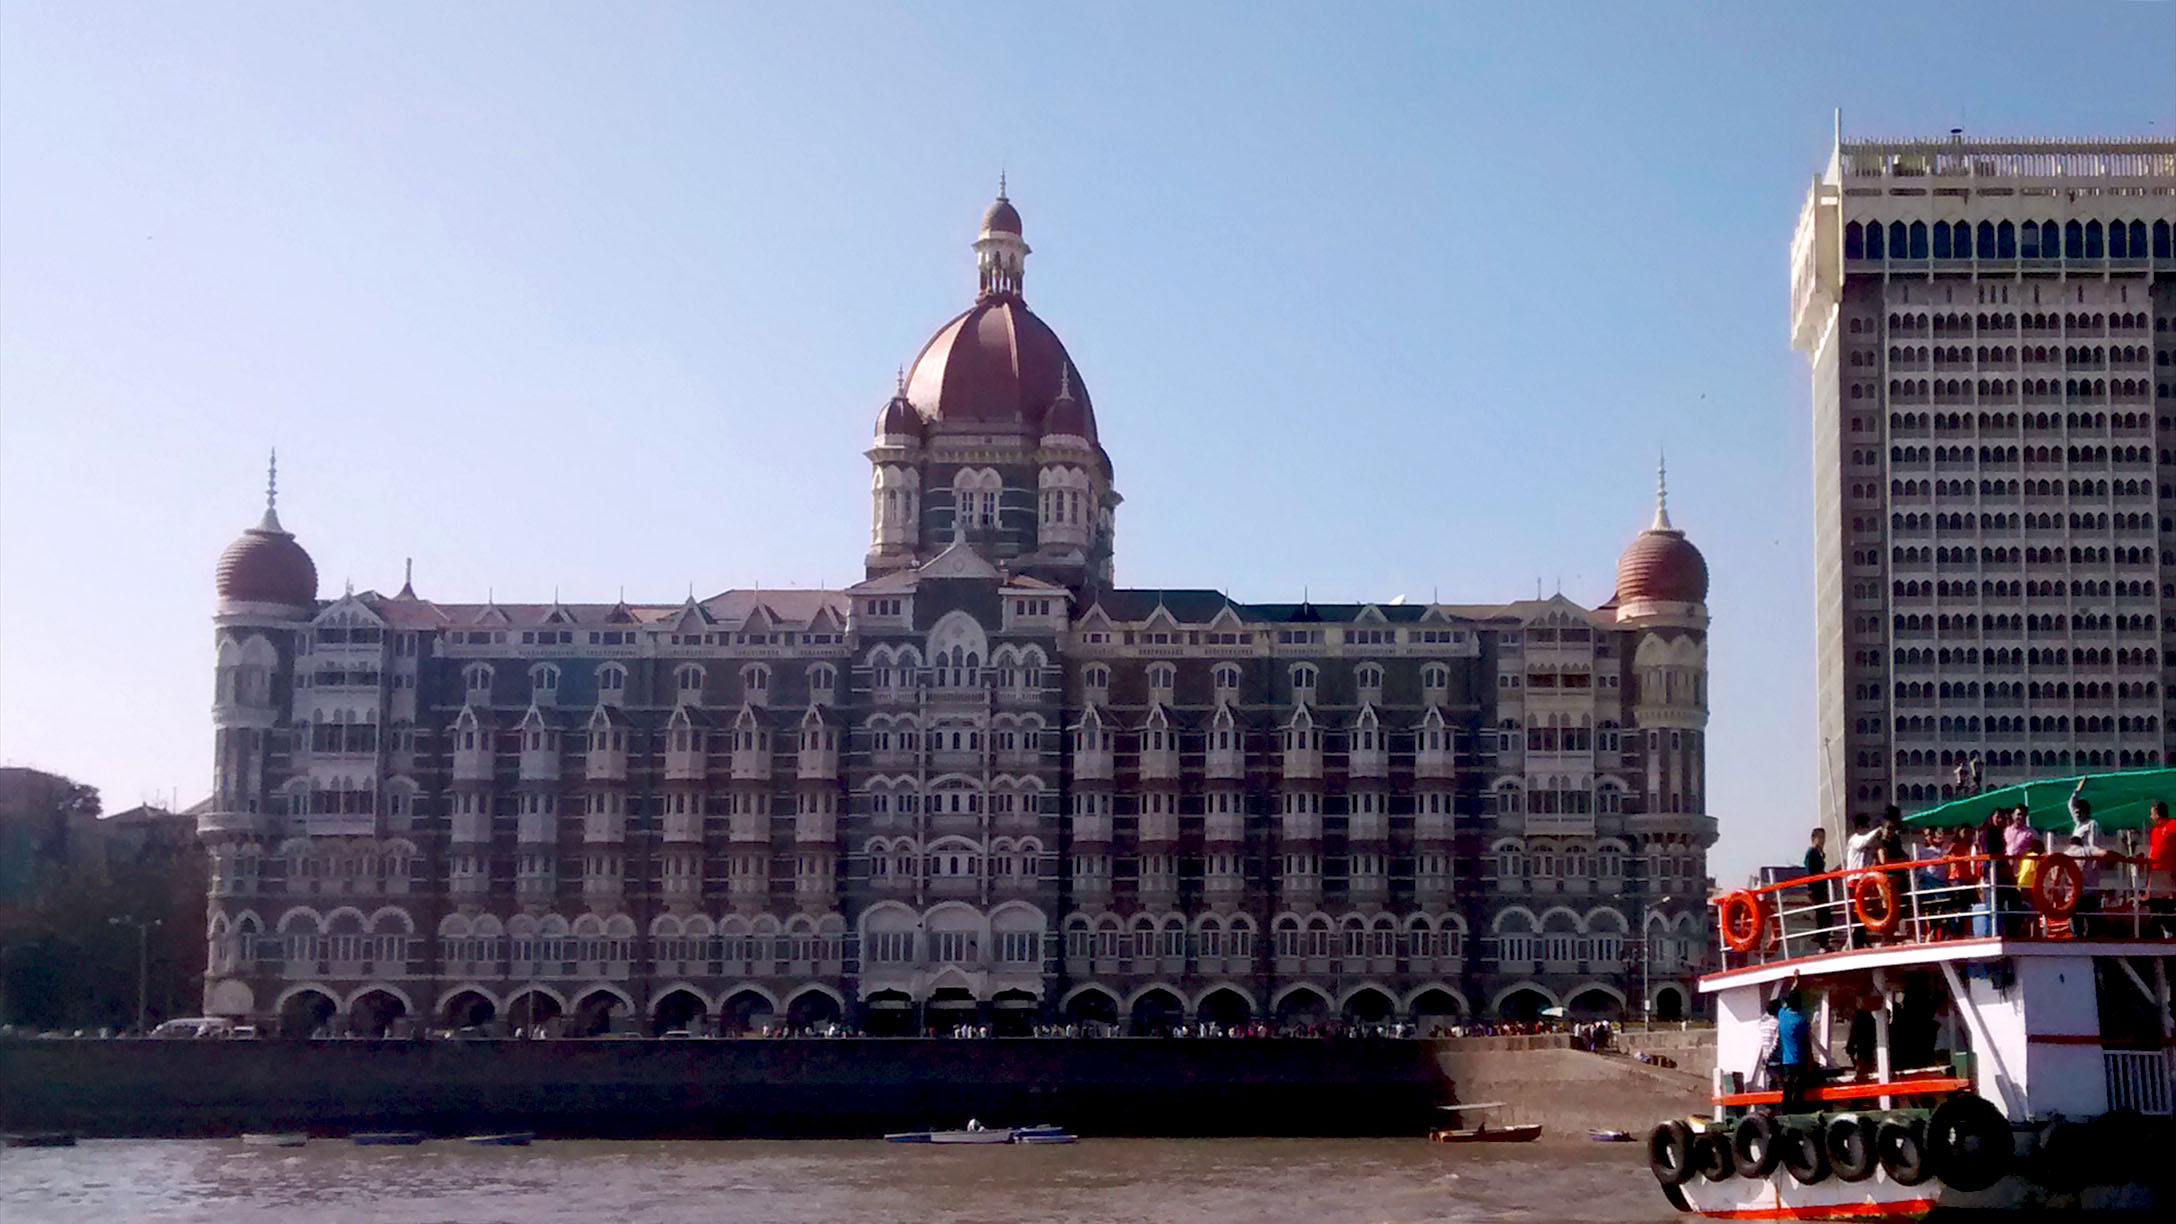 Mumbai — or Bombay, as old-timers still affectionately call her — is a sprawling city of contradictions, where hard labourers jostle alongside billionaires, and historic architectural gems sit grandly amid shiny skyscrapers. Photo by Elita Almeida